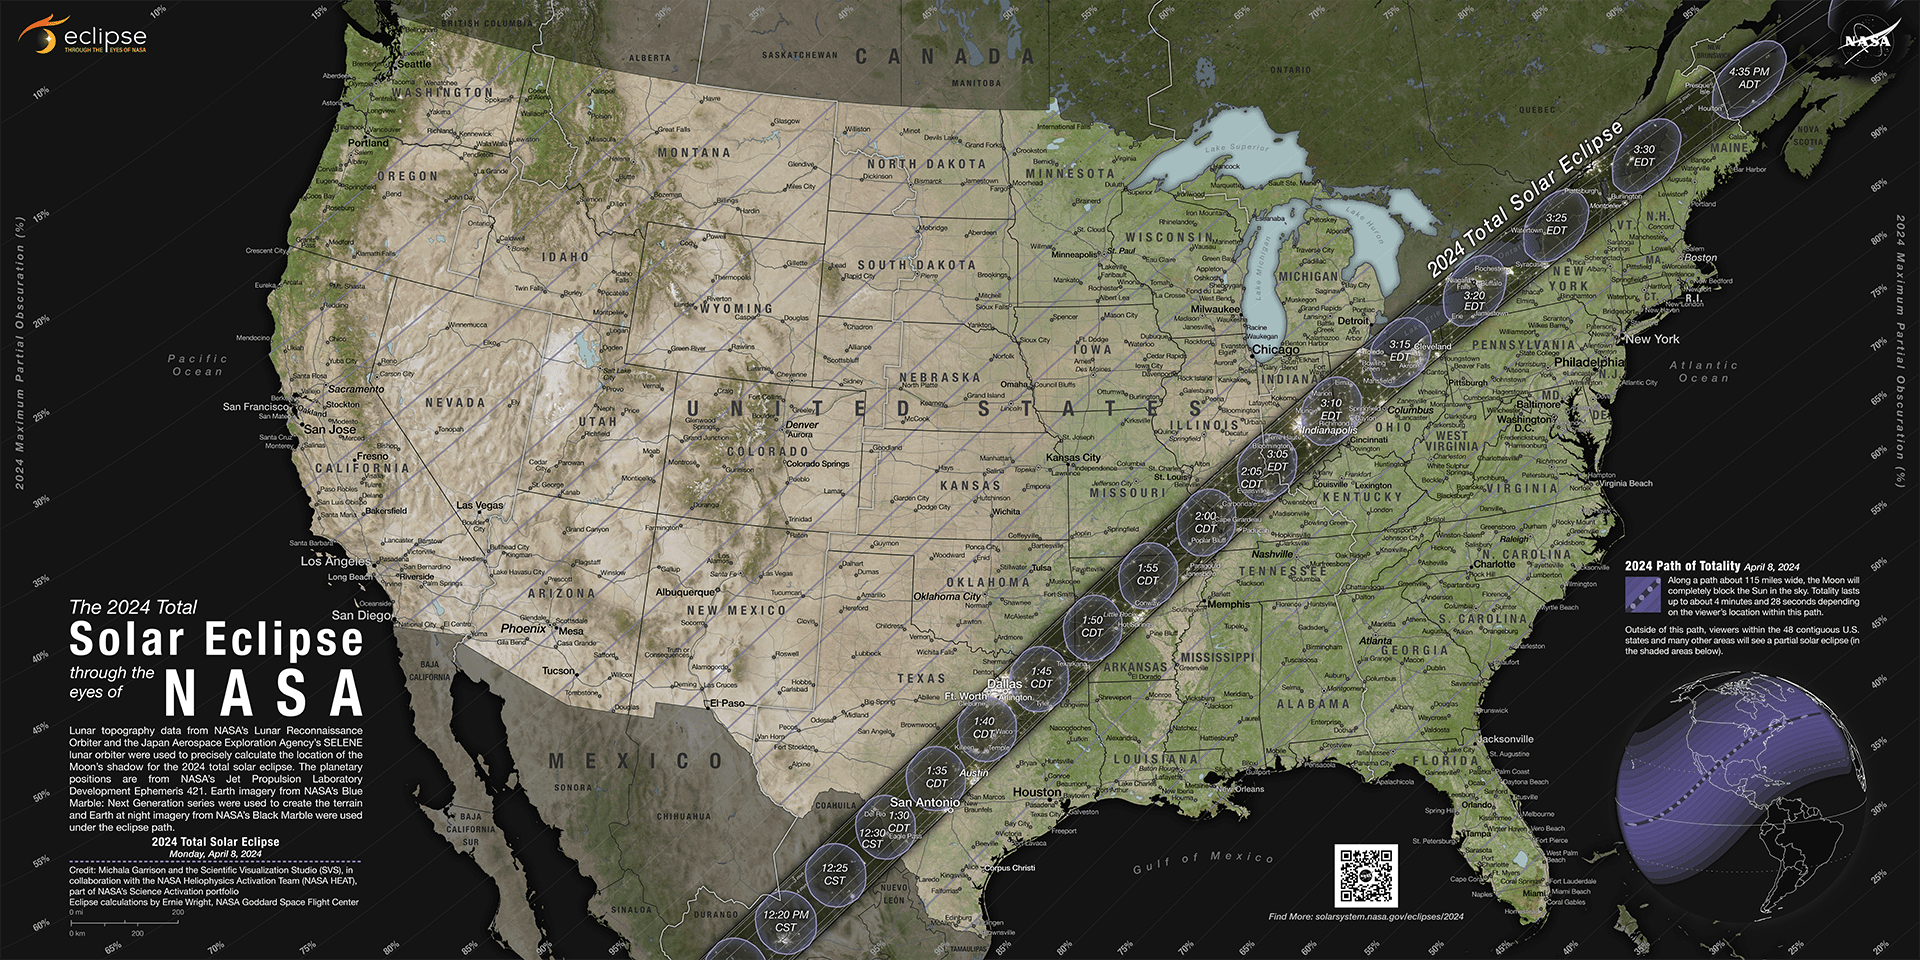 This map shows the path where the moon's shadow will be visible on earth on April 8. Image courtesy of NAPA